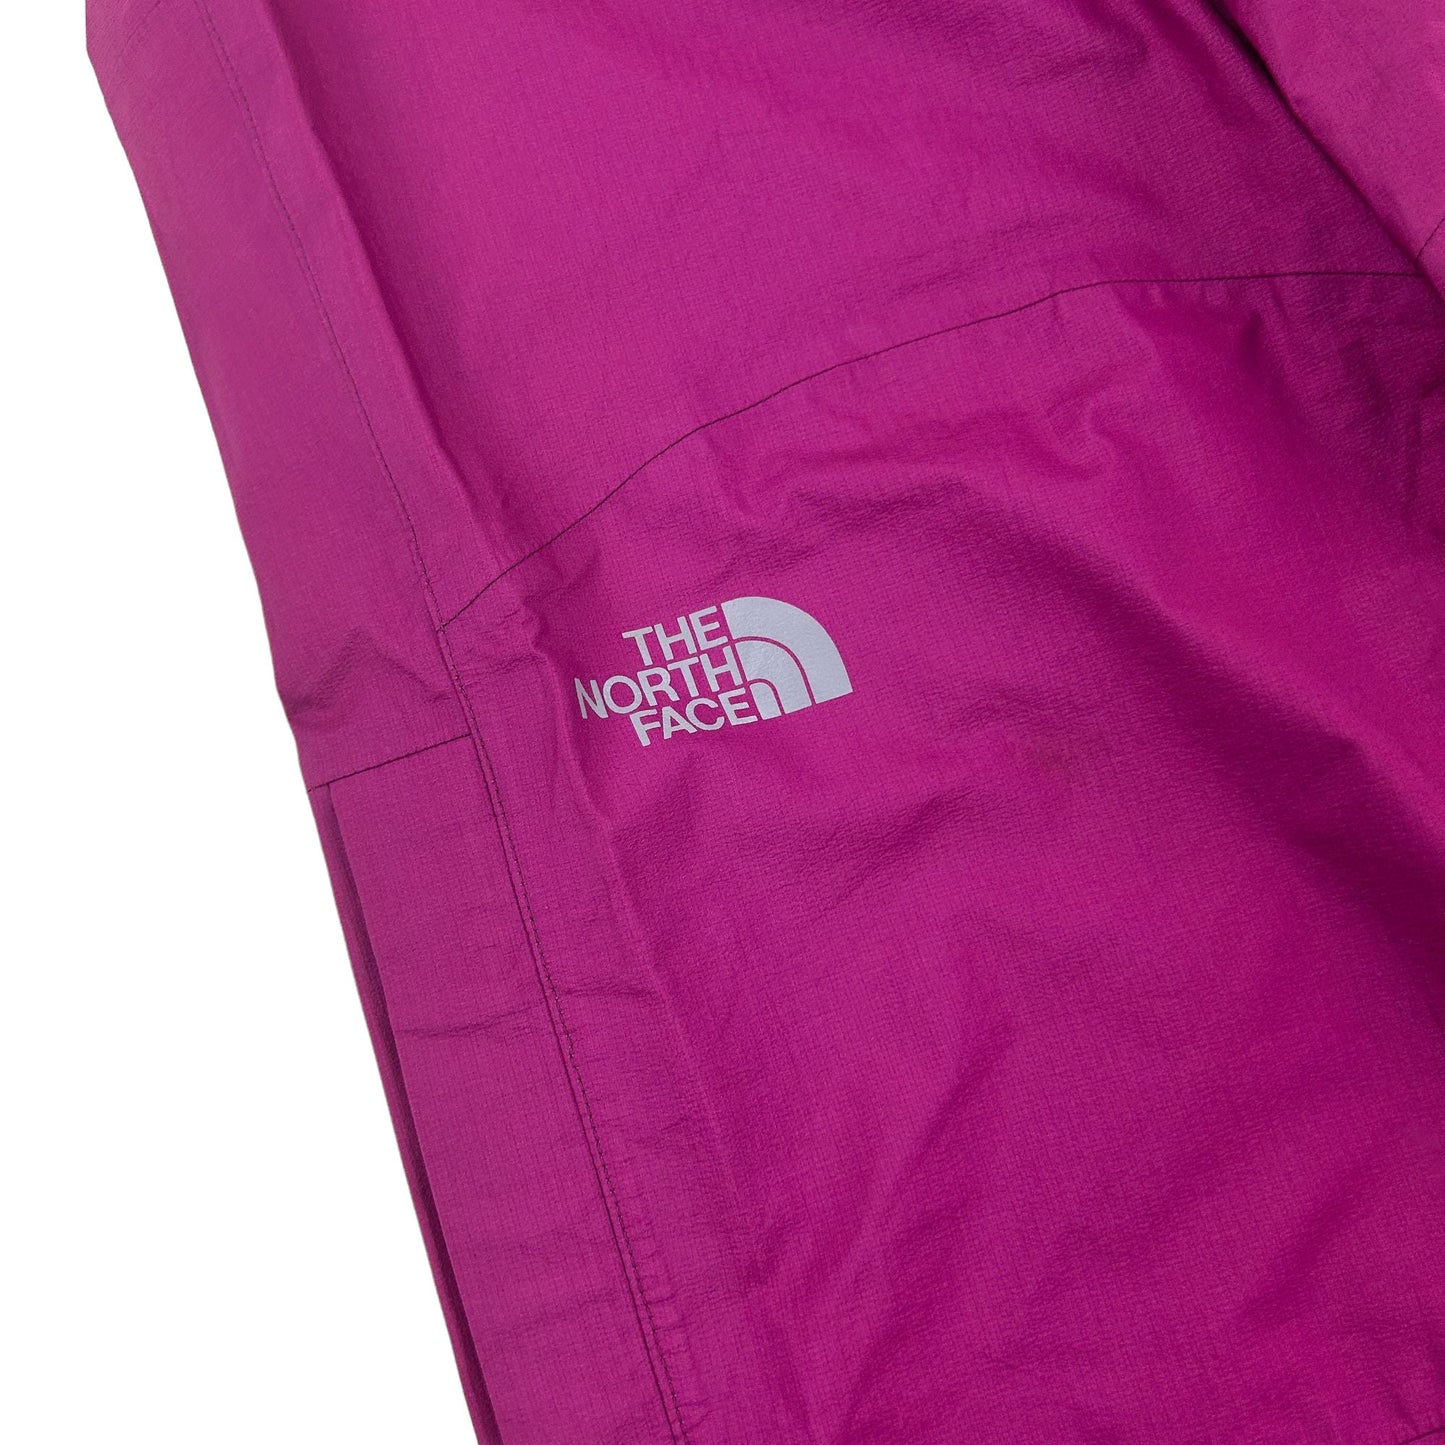 Vintage The North Face Gore-Tex Trousers Size M